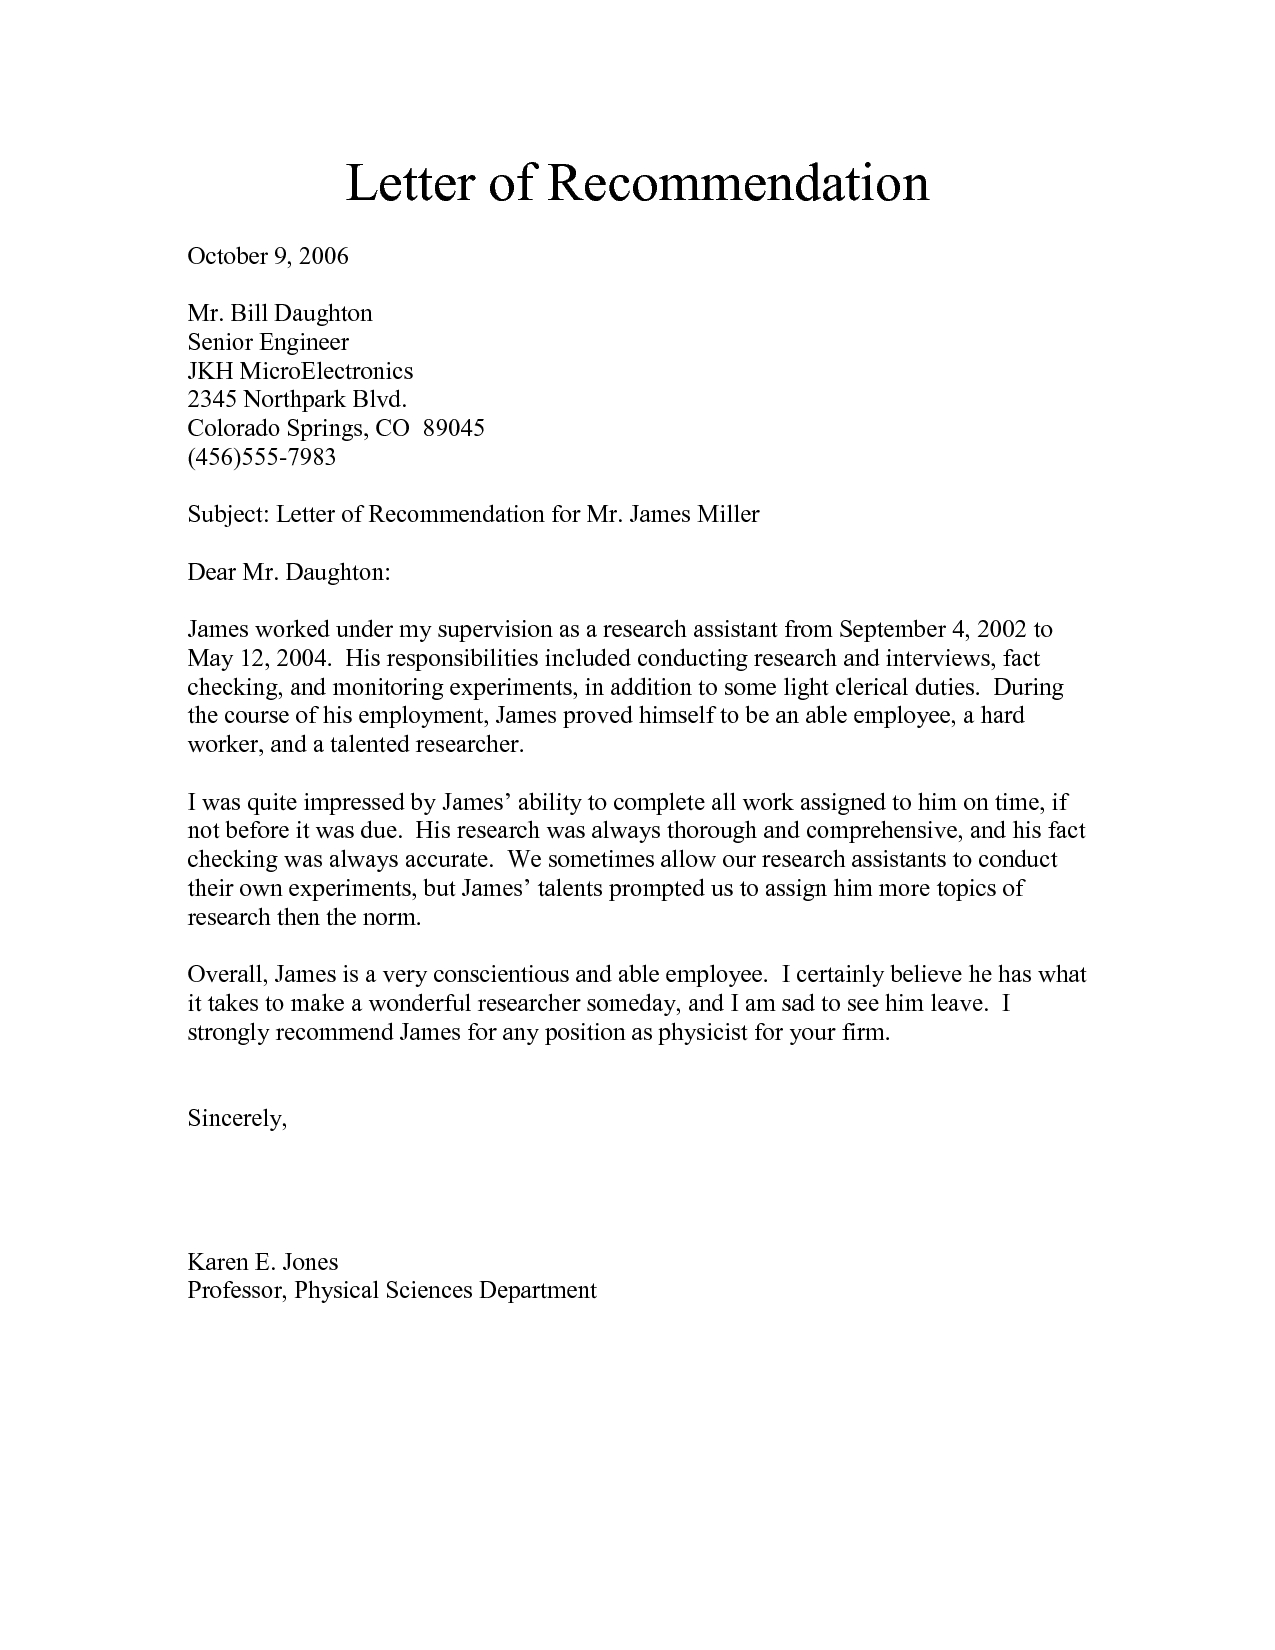 Free Recommendation Letter Printable Calendar Letter Of for dimensions 1275 X 1650